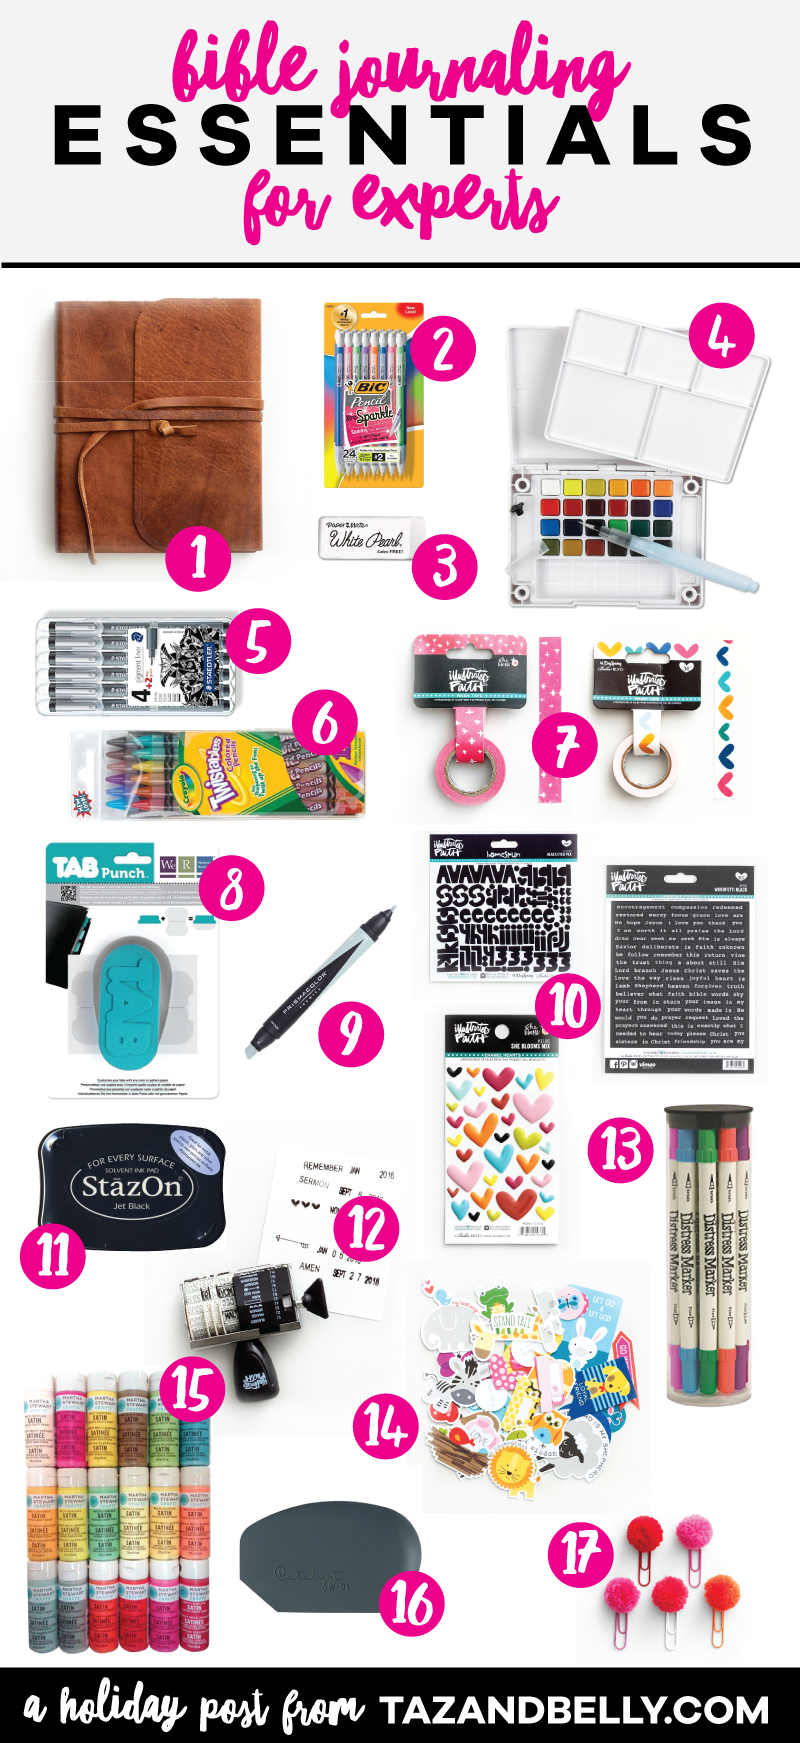 Try this Bible Journaling Holiday Gift Guide for Experts if you're looking to upgrade your current stash. Maybe you're shopping for someone who wants to leave no supply behind. This gift guide includes all of my favorite journaling supplies, along with a few splurges and upgrades. tazandbelly.com